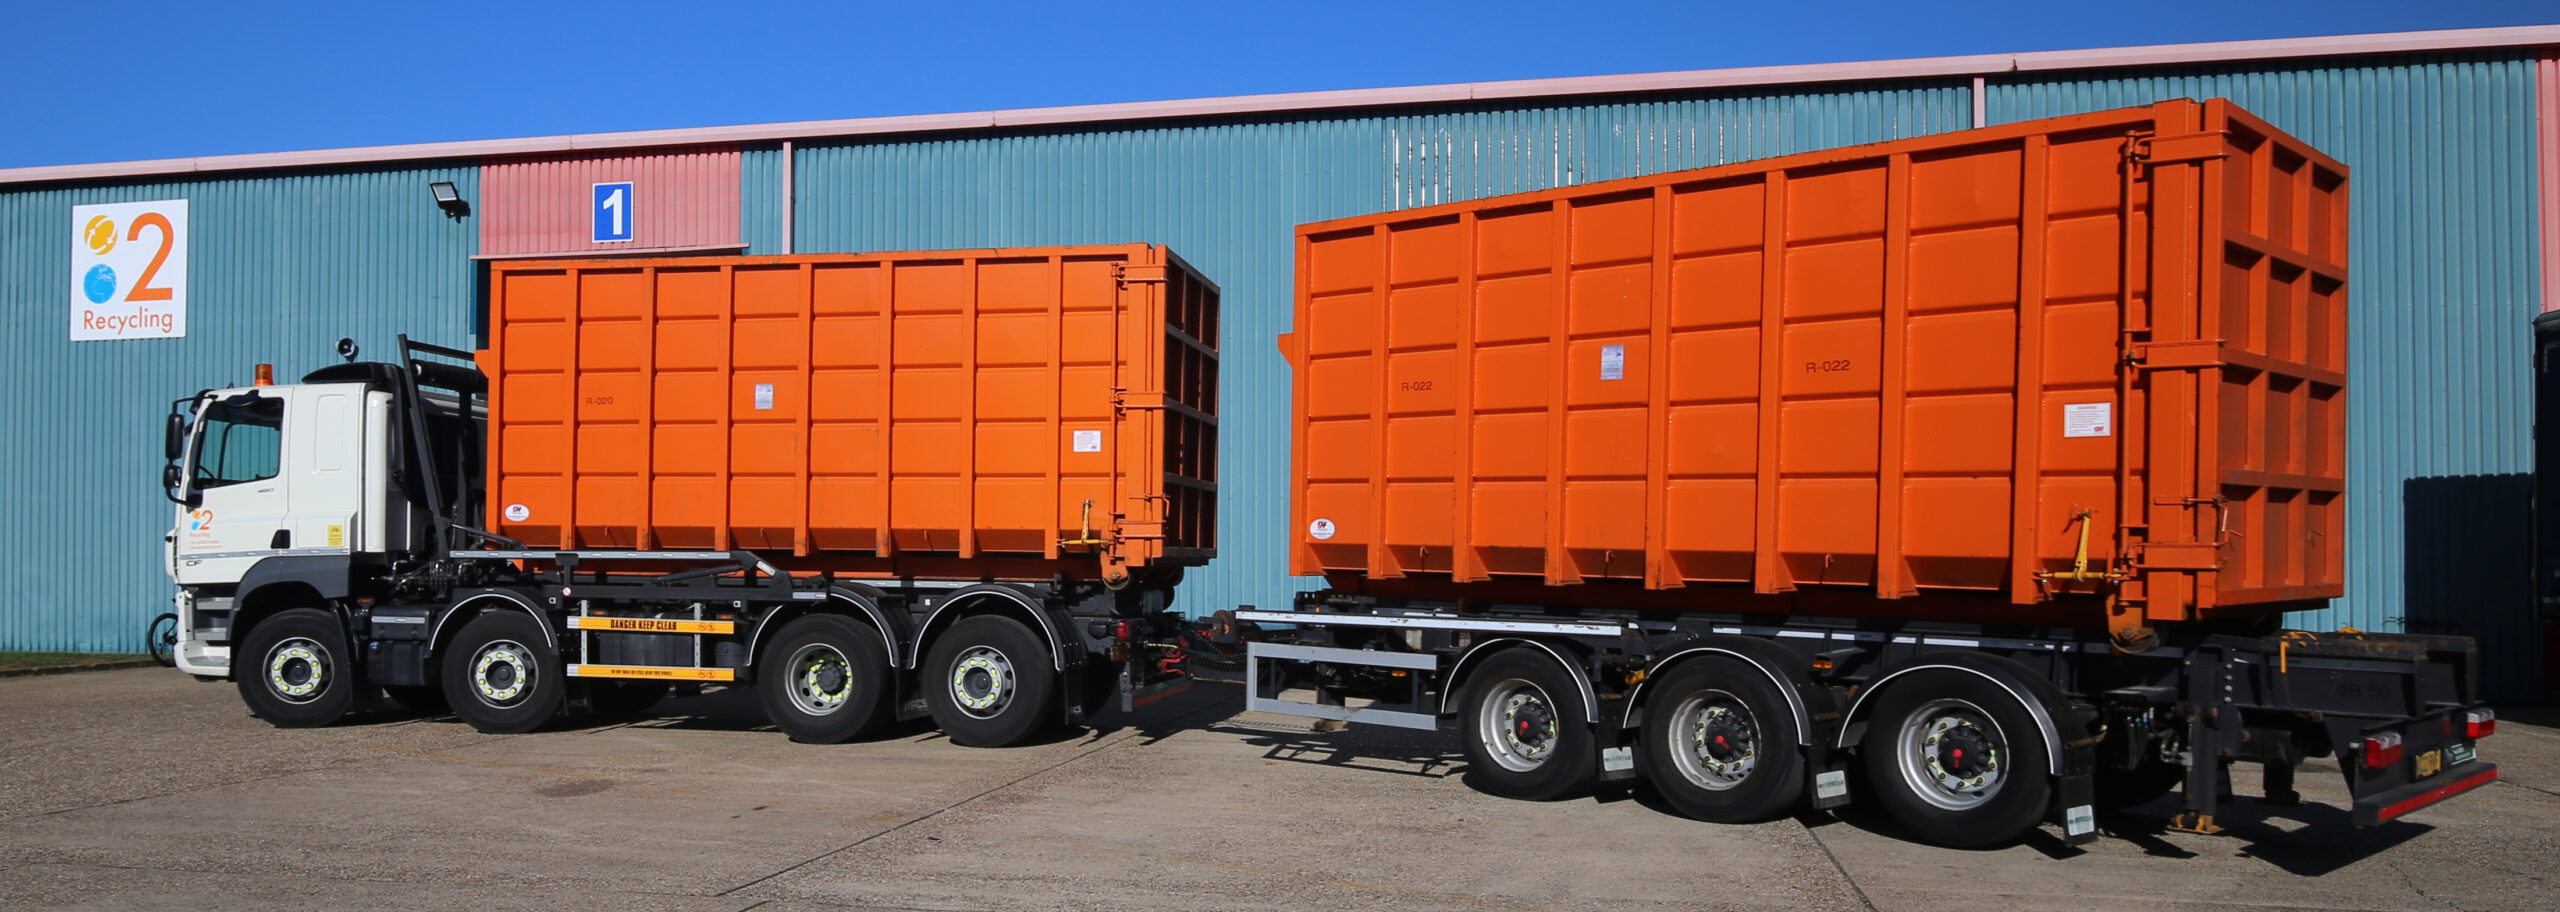 RoRo Skips being transported for scrap metal recycling